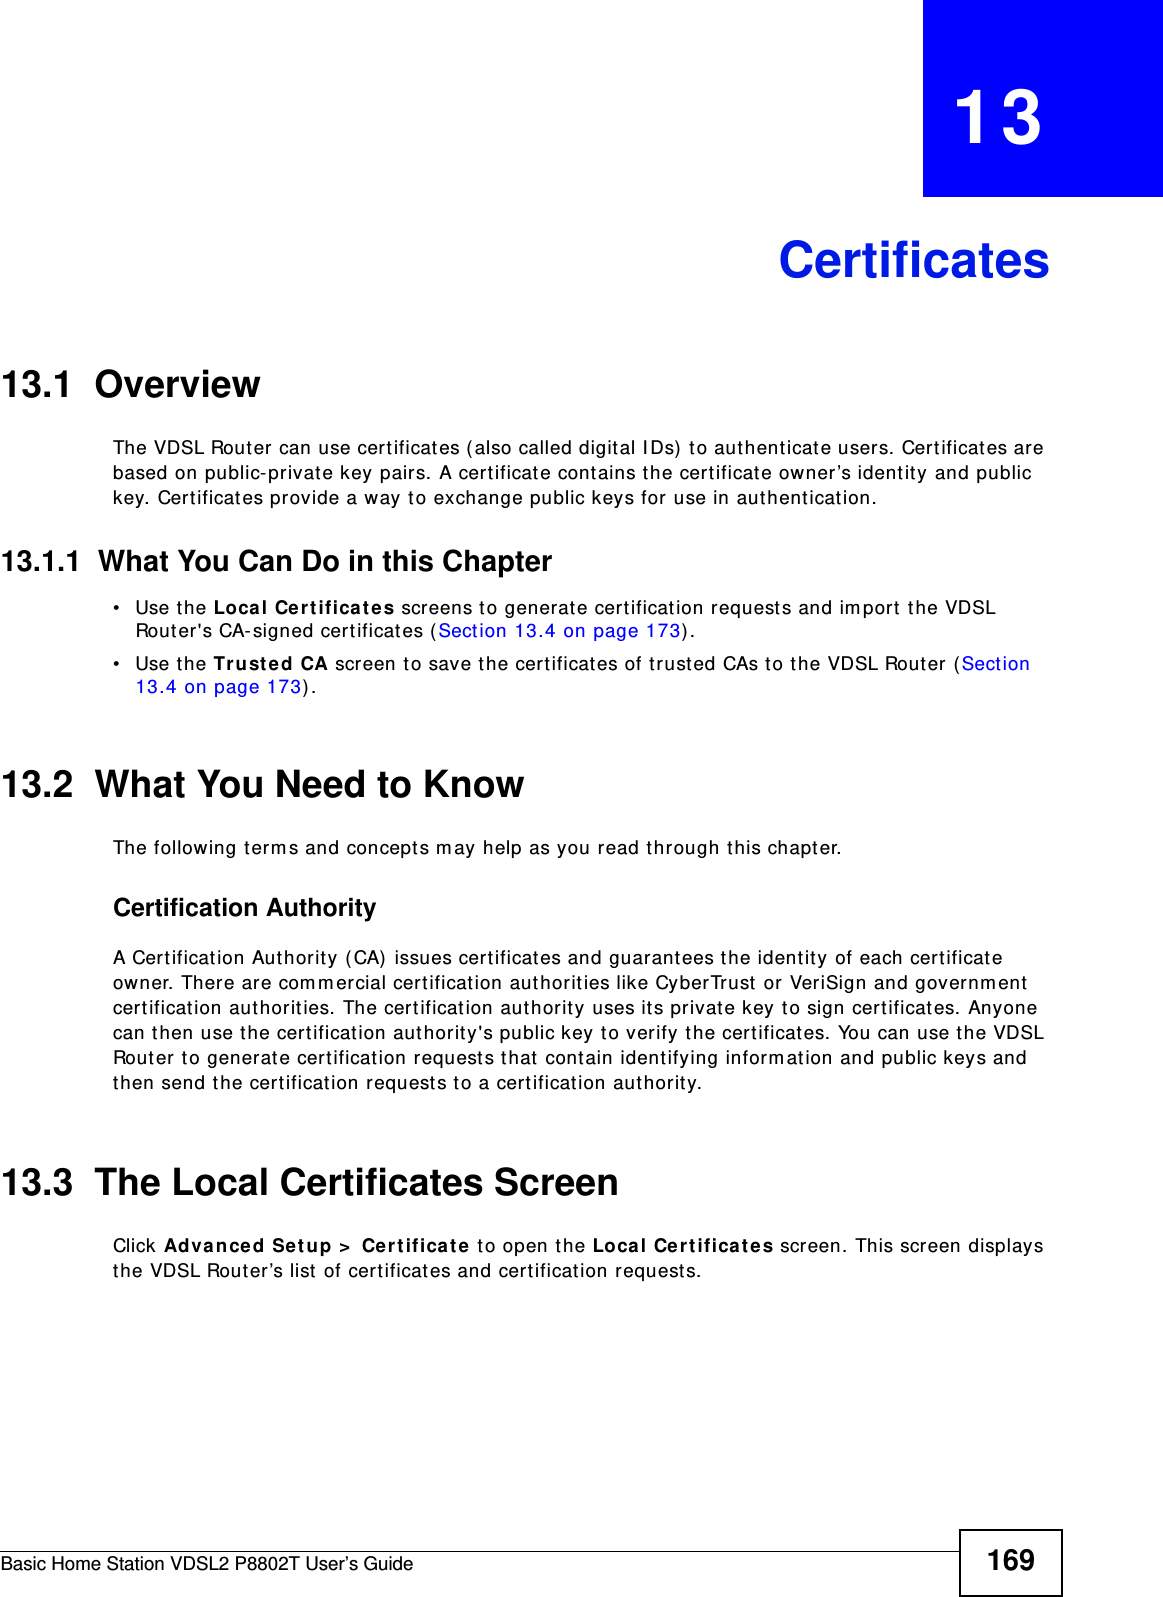 Basic Home Station VDSL2 P8802T User’s Guide 169CHAPTER   13Certificates13.1  OverviewThe VDSL Router can use cert ificat es ( also called digit al I Ds)  t o authent icat e user s. Cert ificates are based on public- privat e key pairs. A certificate cont ains t he certificat e owner ’s ident ity and public key. Cert ificates provide a way to exchange public keys for  use in aut hent icat ion. 13.1.1  What You Can Do in this Chapter• Use the Loca l Ce rtifica t es screens t o generat e cer tificat ion request s and im port the VDSL Router&apos;s CA-signed certificates (Sect ion 13.4 on page 173) .• Use the Tru st ed CA screen to save the certificates of t rust ed CAs to t he VDSL Router (Sect ion 13.4 on page 173) .13.2  What You Need to KnowThe following t erm s and concept s m ay help as you read t hrough this chapt er.Certification Authority A Cert ification Aut horit y ( CA) issues certificates and guarantees the ident ity of each certificat e owner. There are com m ercial certification aut horit ies like CyberTrust or VeriSign and governm ent  certificat ion aut horit ies. The cert ificat ion aut horit y uses it s private key to sign cert ificates. Anyone can t hen use t he certificat ion aut horit y&apos;s public key t o verify the cer tificat es. You can use t he VDSL Router to generat e certificat ion request s t hat  contain ident ifying inform ation and public keys and then send t he certificat ion request s t o a certification aut horit y.13.3  The Local Certificates ScreenClick Advance d Setup &gt;  Certifica t e to open the Loca l Ce rt ificate s screen. This screen displays the VDSL Router ’s list  of certificat es and certification request s. 